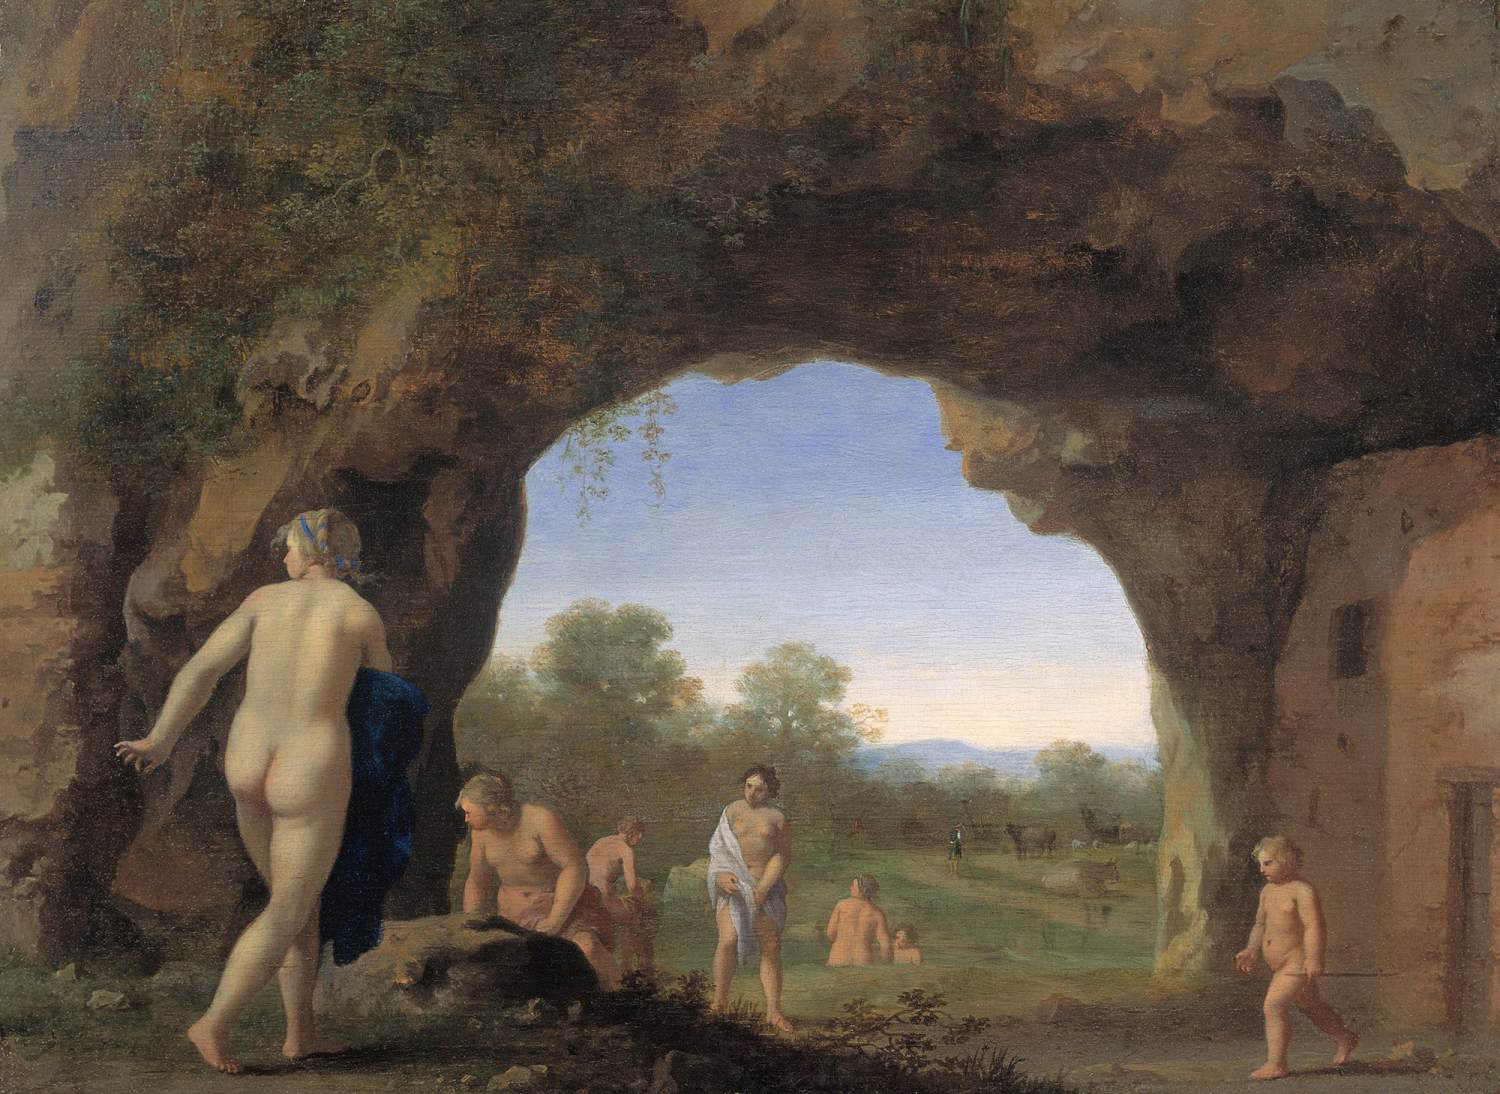 Landscape with Nymphs Near a Grotto